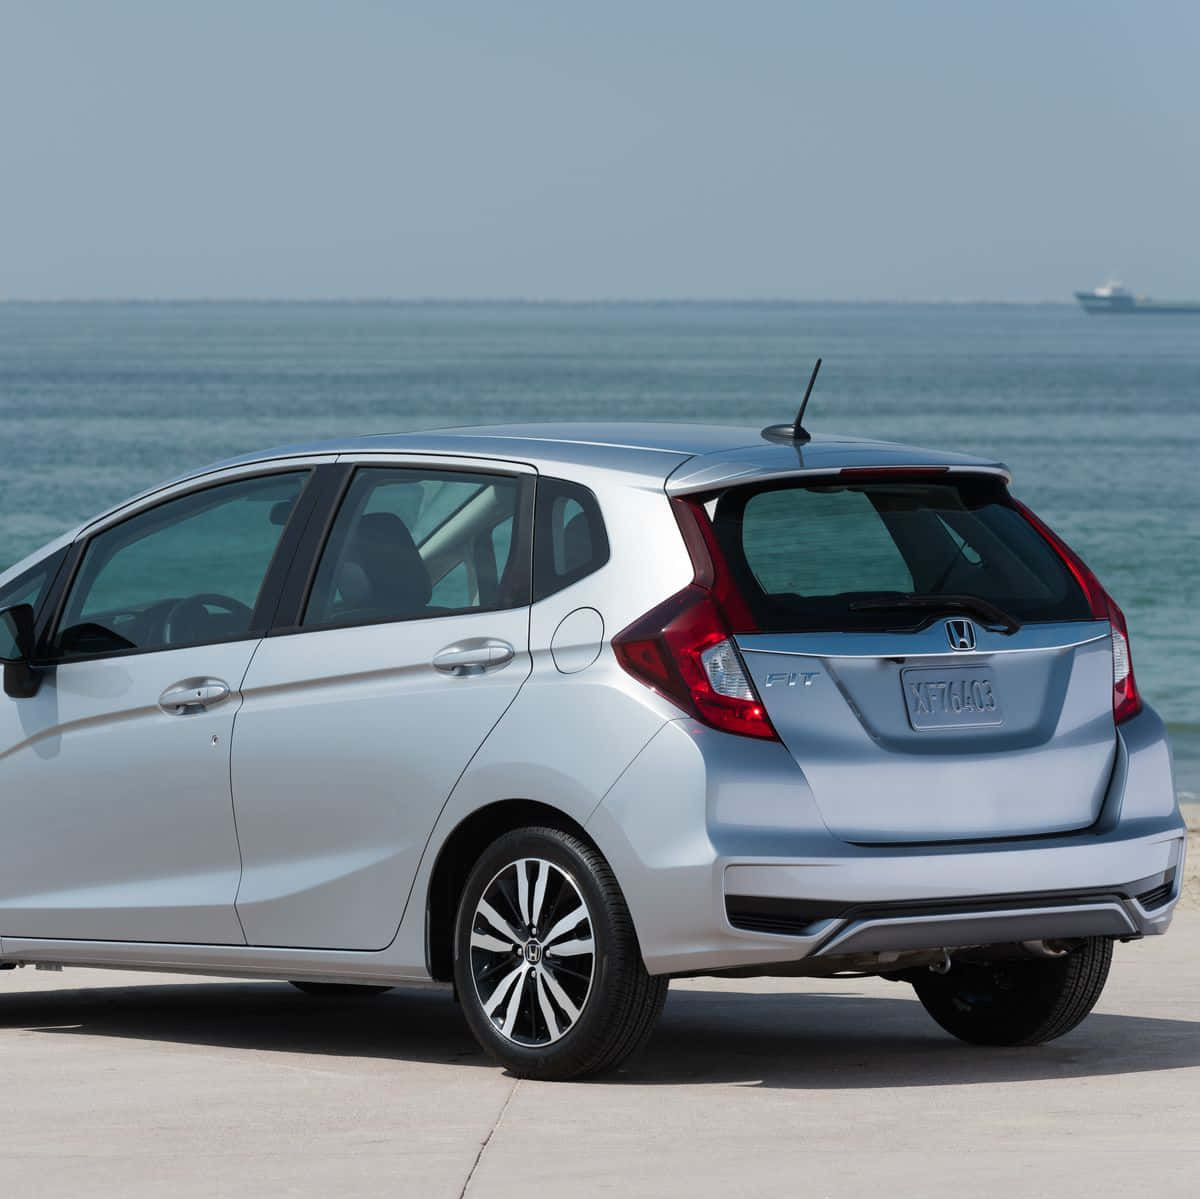 Sleek and Stylish Honda Fit in Action Wallpaper